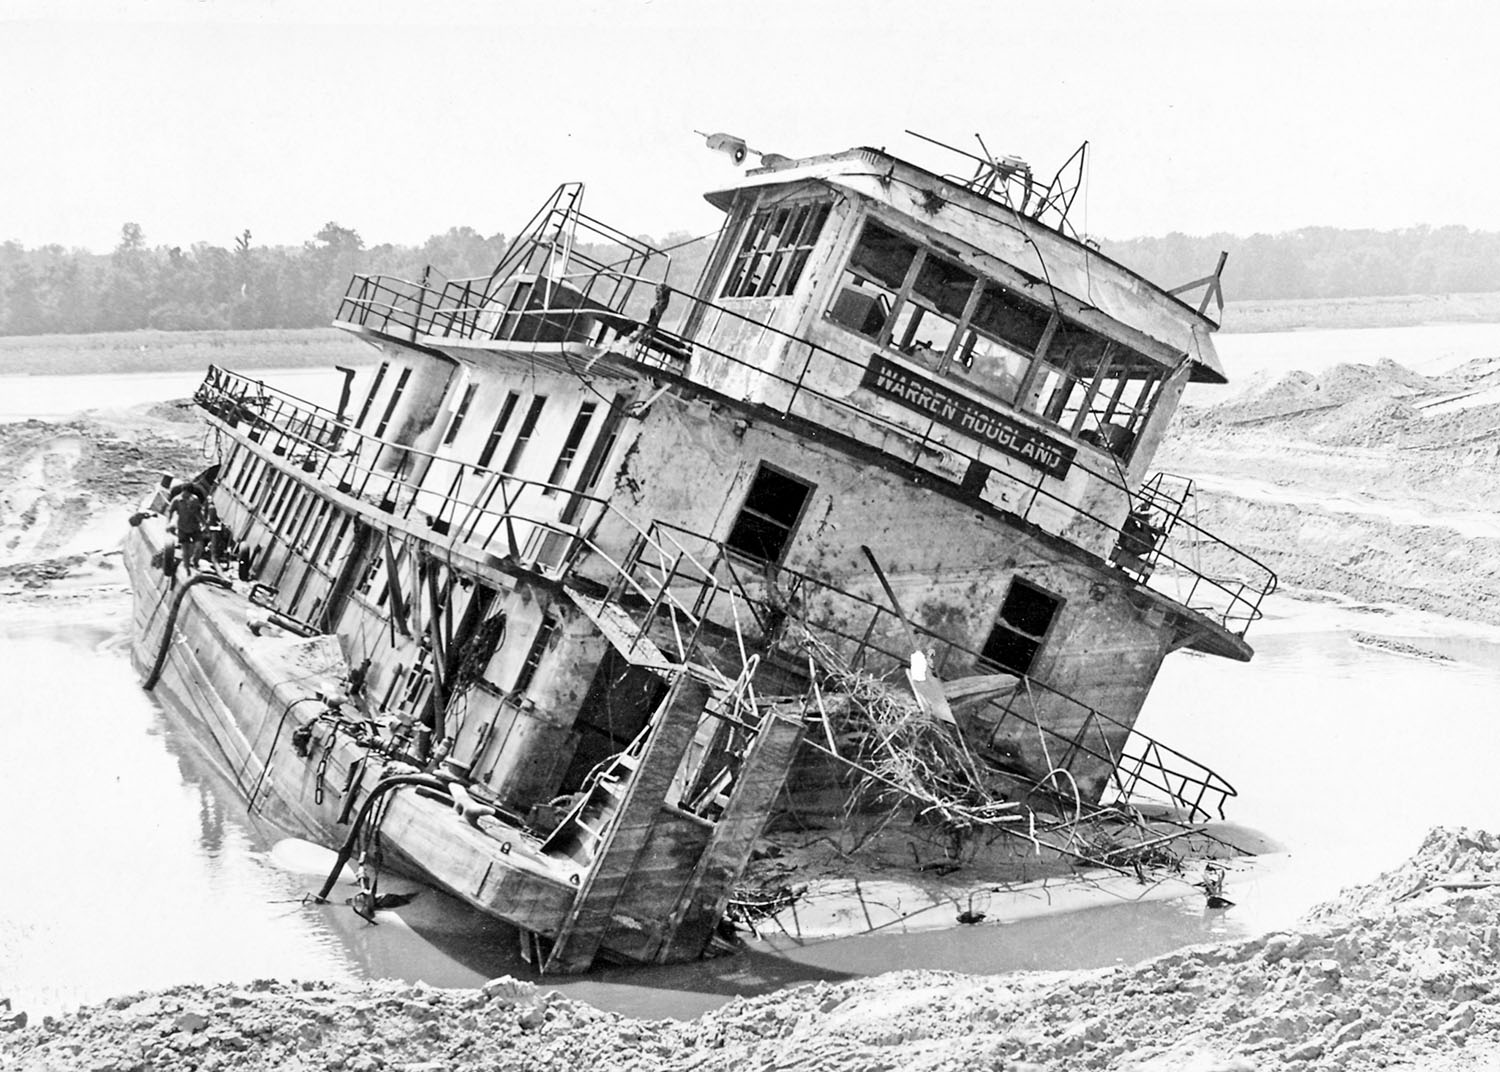 The Warren Hougland at Mile 412.3 Lower Mississippi River, August 23, 1973, emerging from the sand during salvage. (Dan Owen Boat Photo Museum collection)